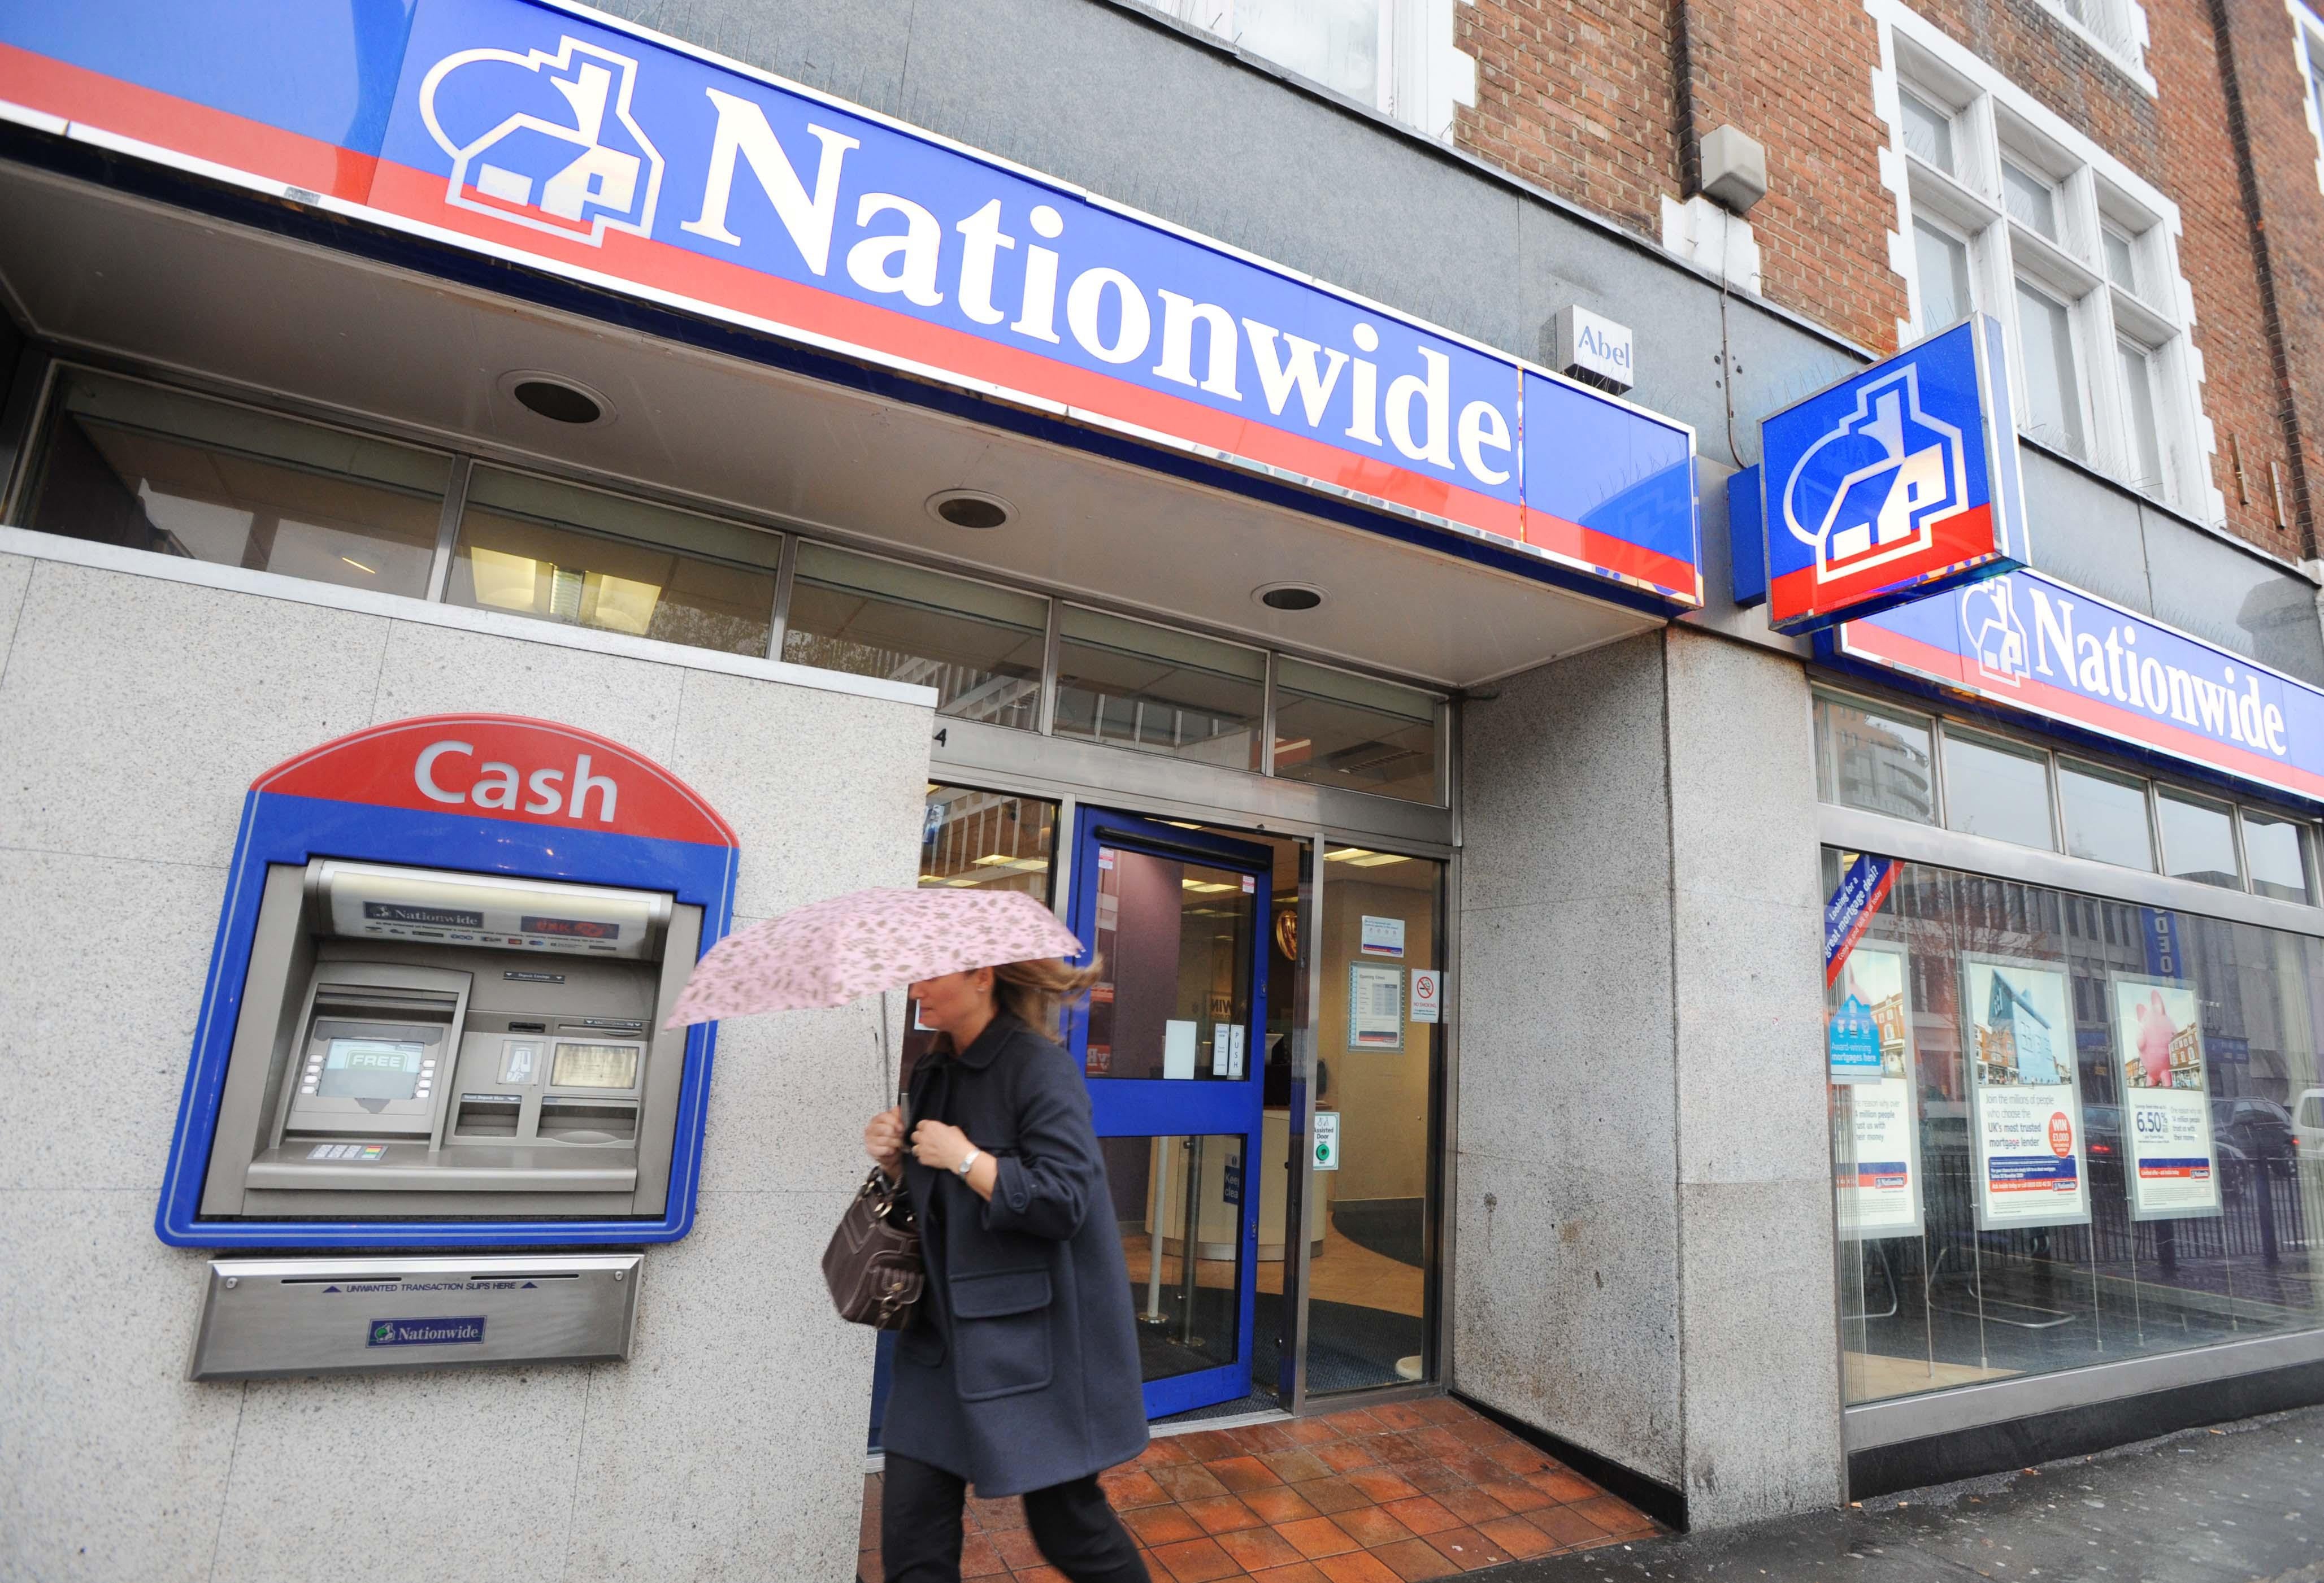 Nationwide is offering the rate to attract savers after years of low returns